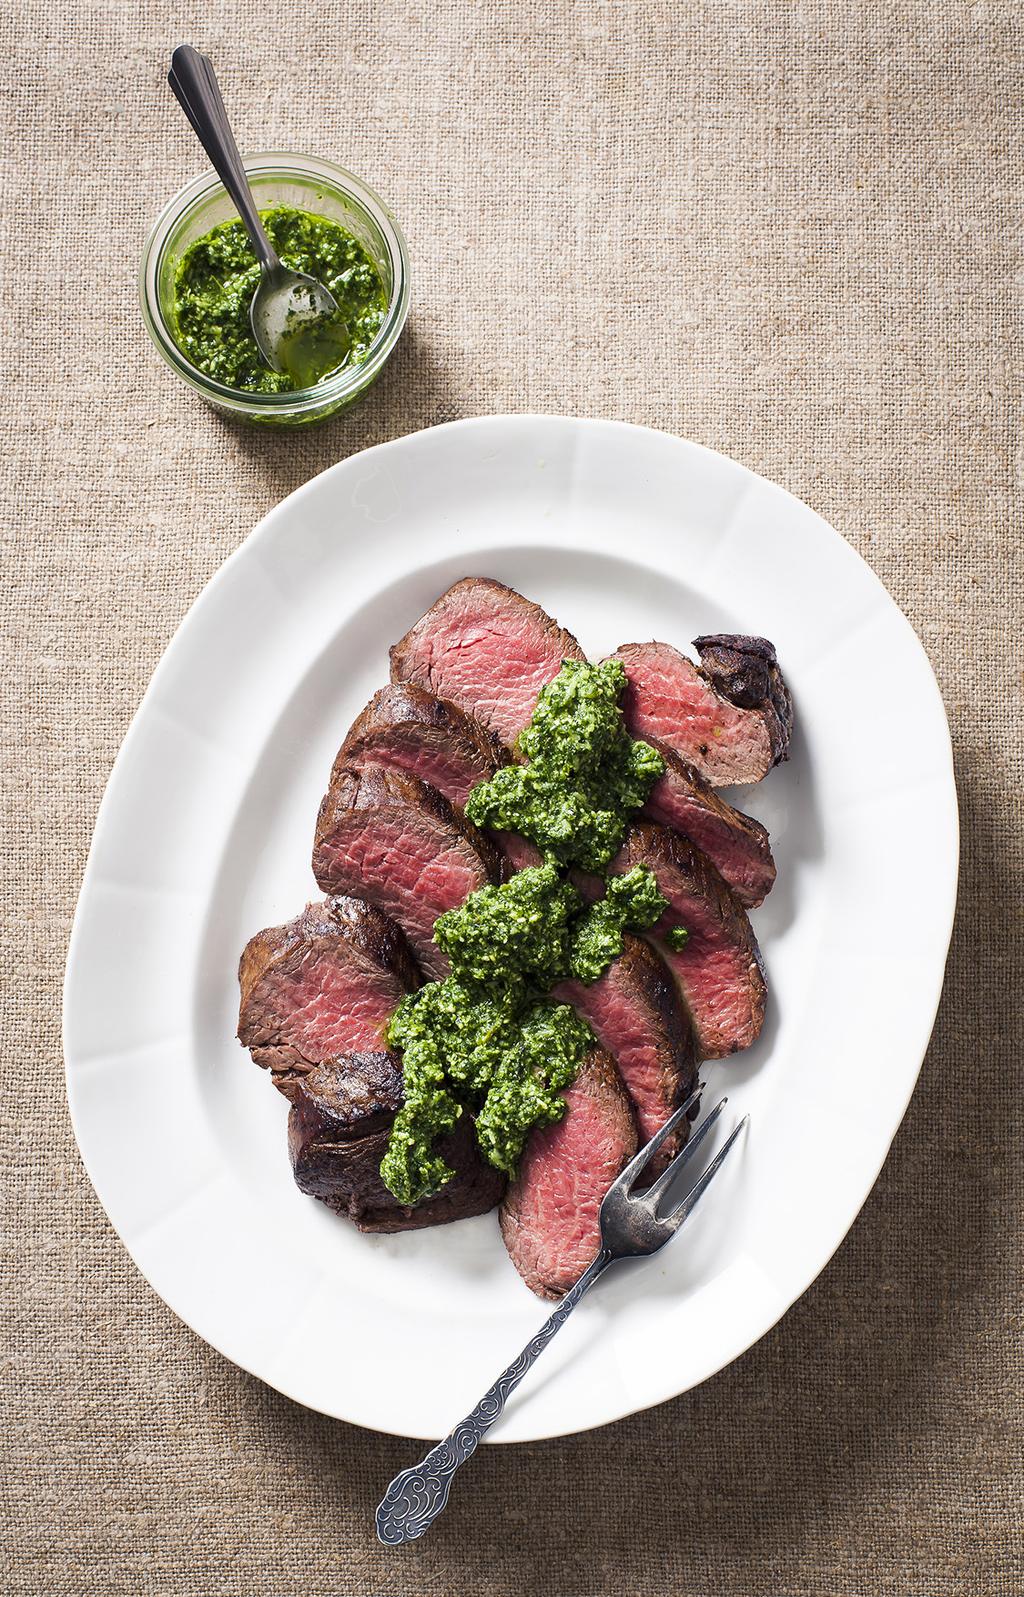 Filetto al pesto prezzemolato Beef tenderloin with Parsley Pesto Serves 6 Preparation: 20 minutes Cooking: 20 minutes Season the meat with salt and pepper, brush it with oil, and cook in a pan for 20